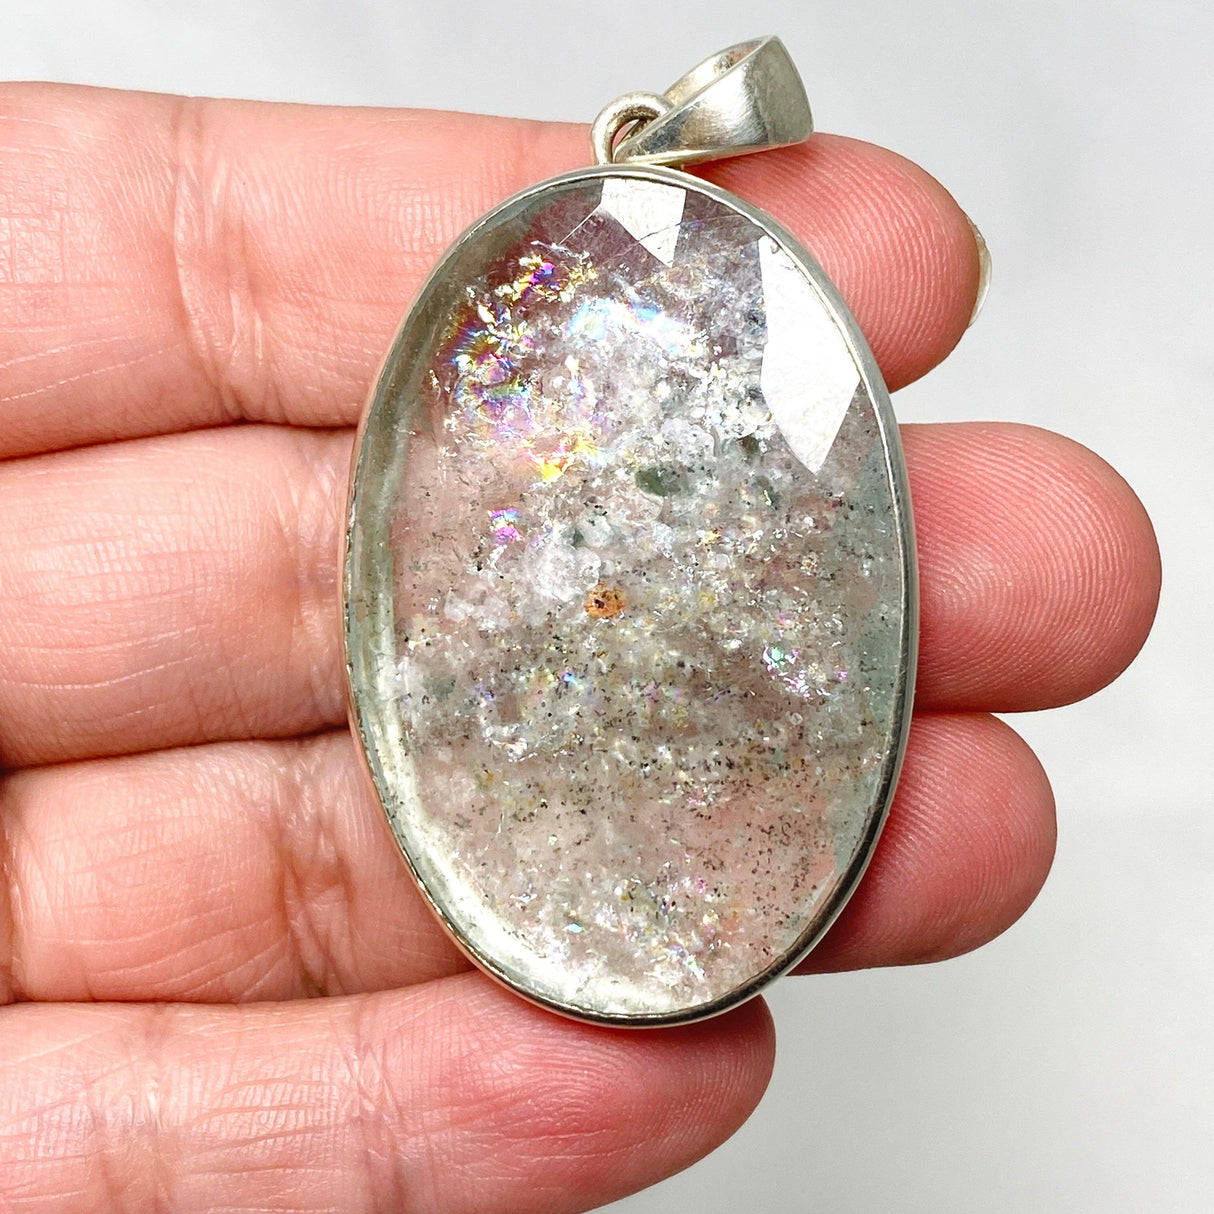 African Aquamarine Faceted Oval Pendant PPGJ739 - Nature's Magick